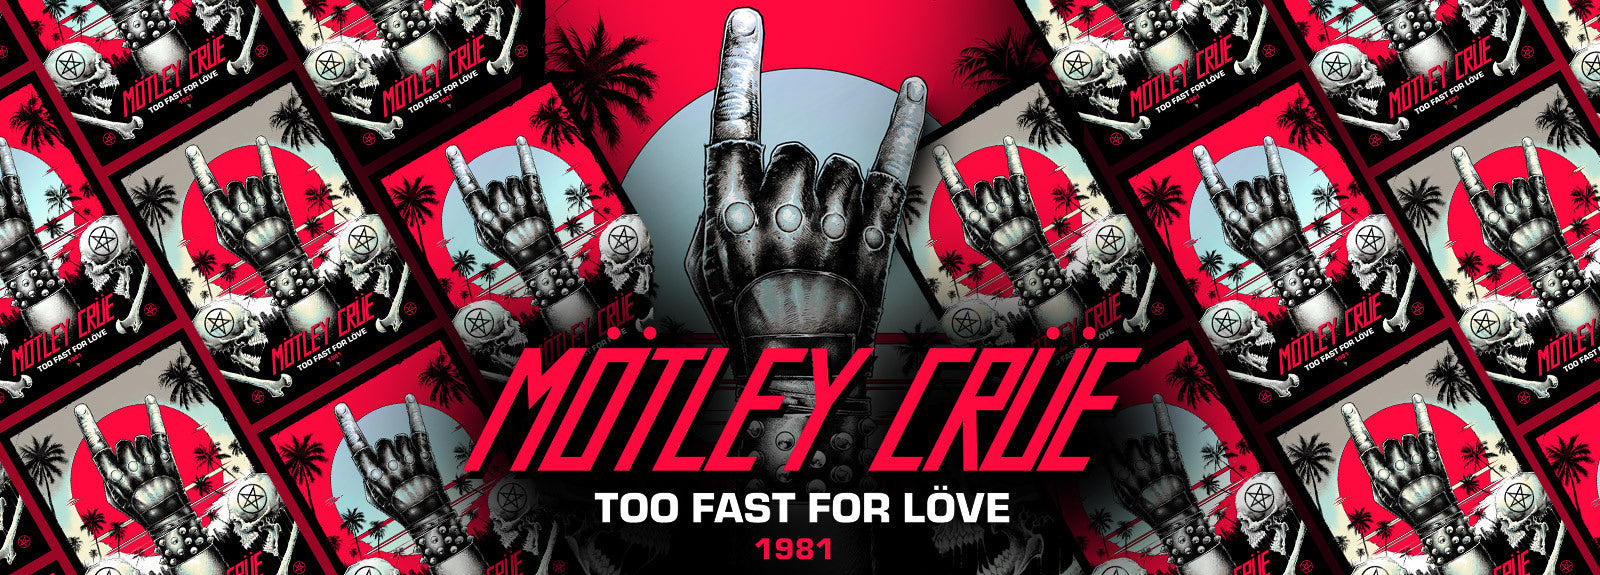 Behind the Poster: Mötley Crüe Too Fast For Love